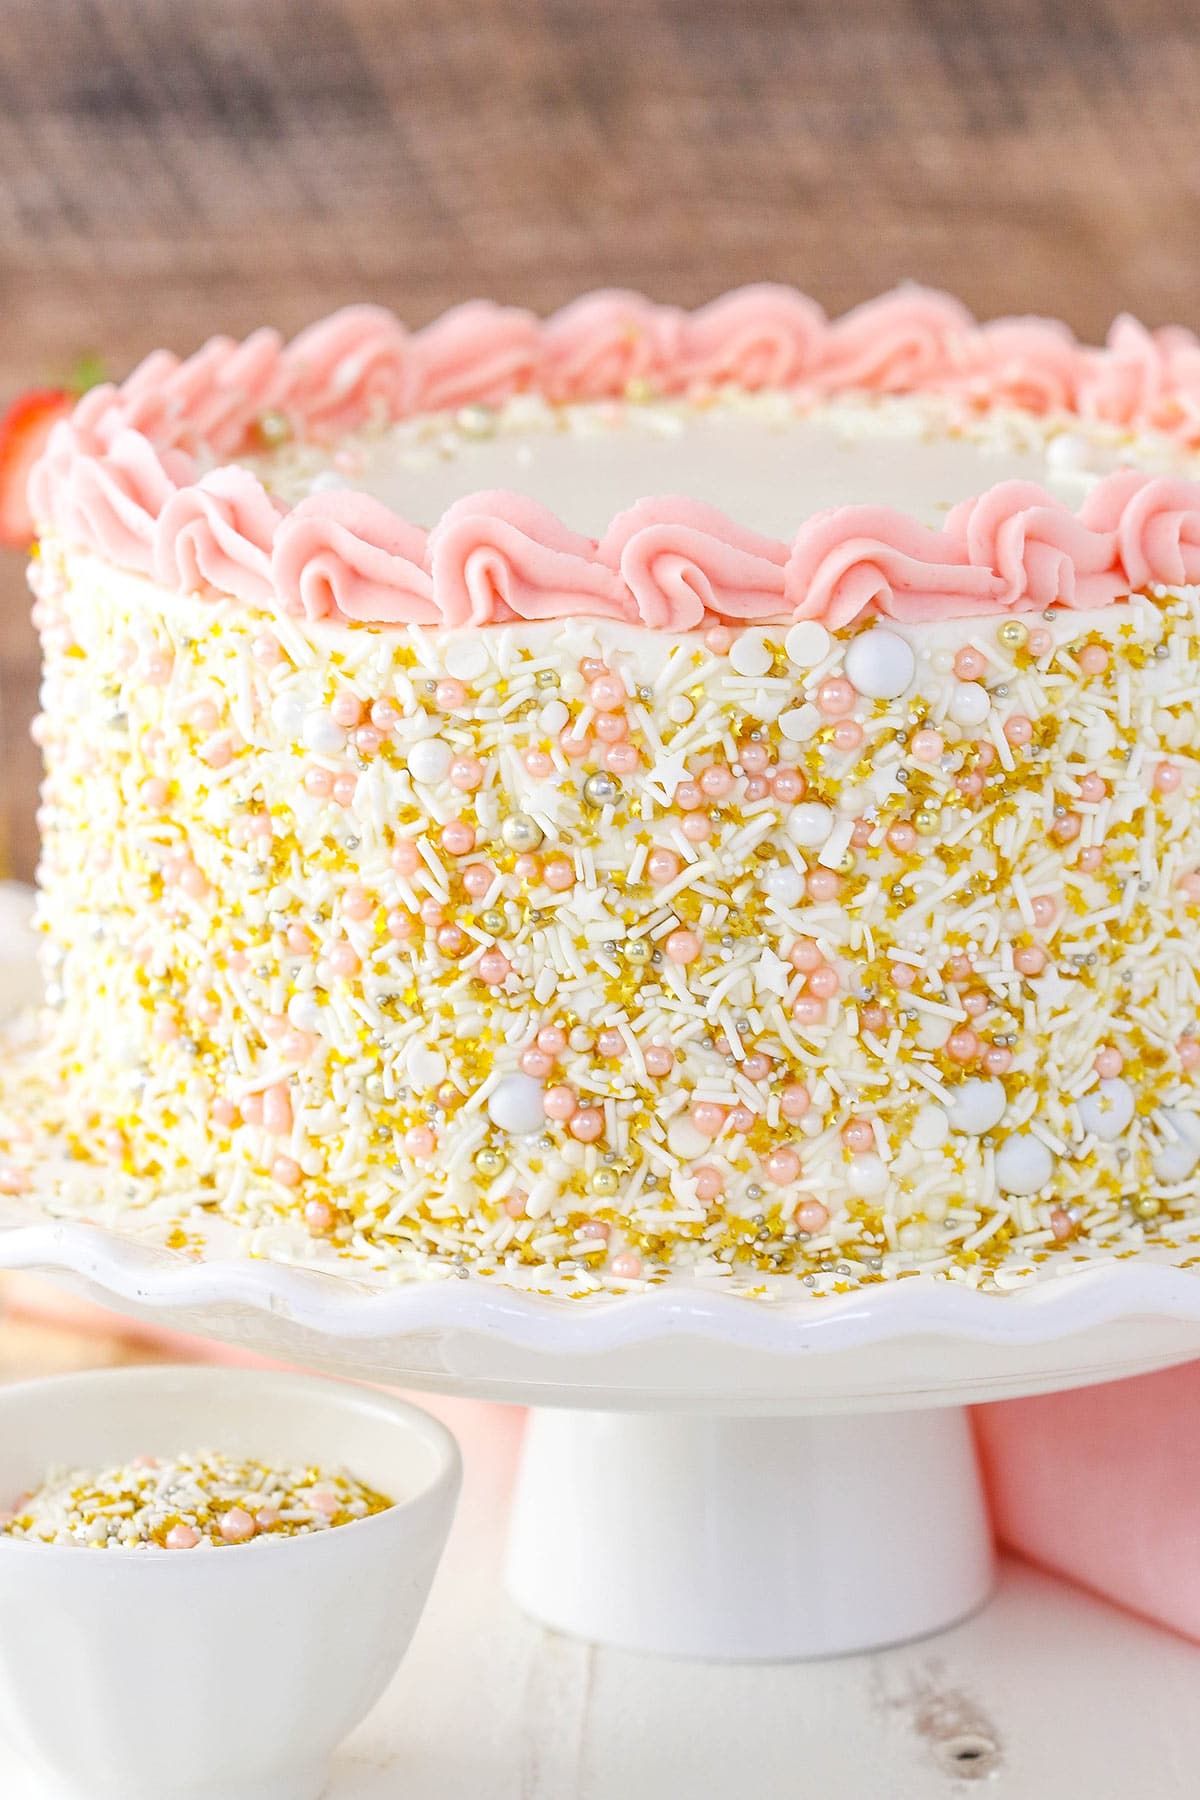 A strawberry champagne layer cake on a white cake stand beside a pink kitchen towel